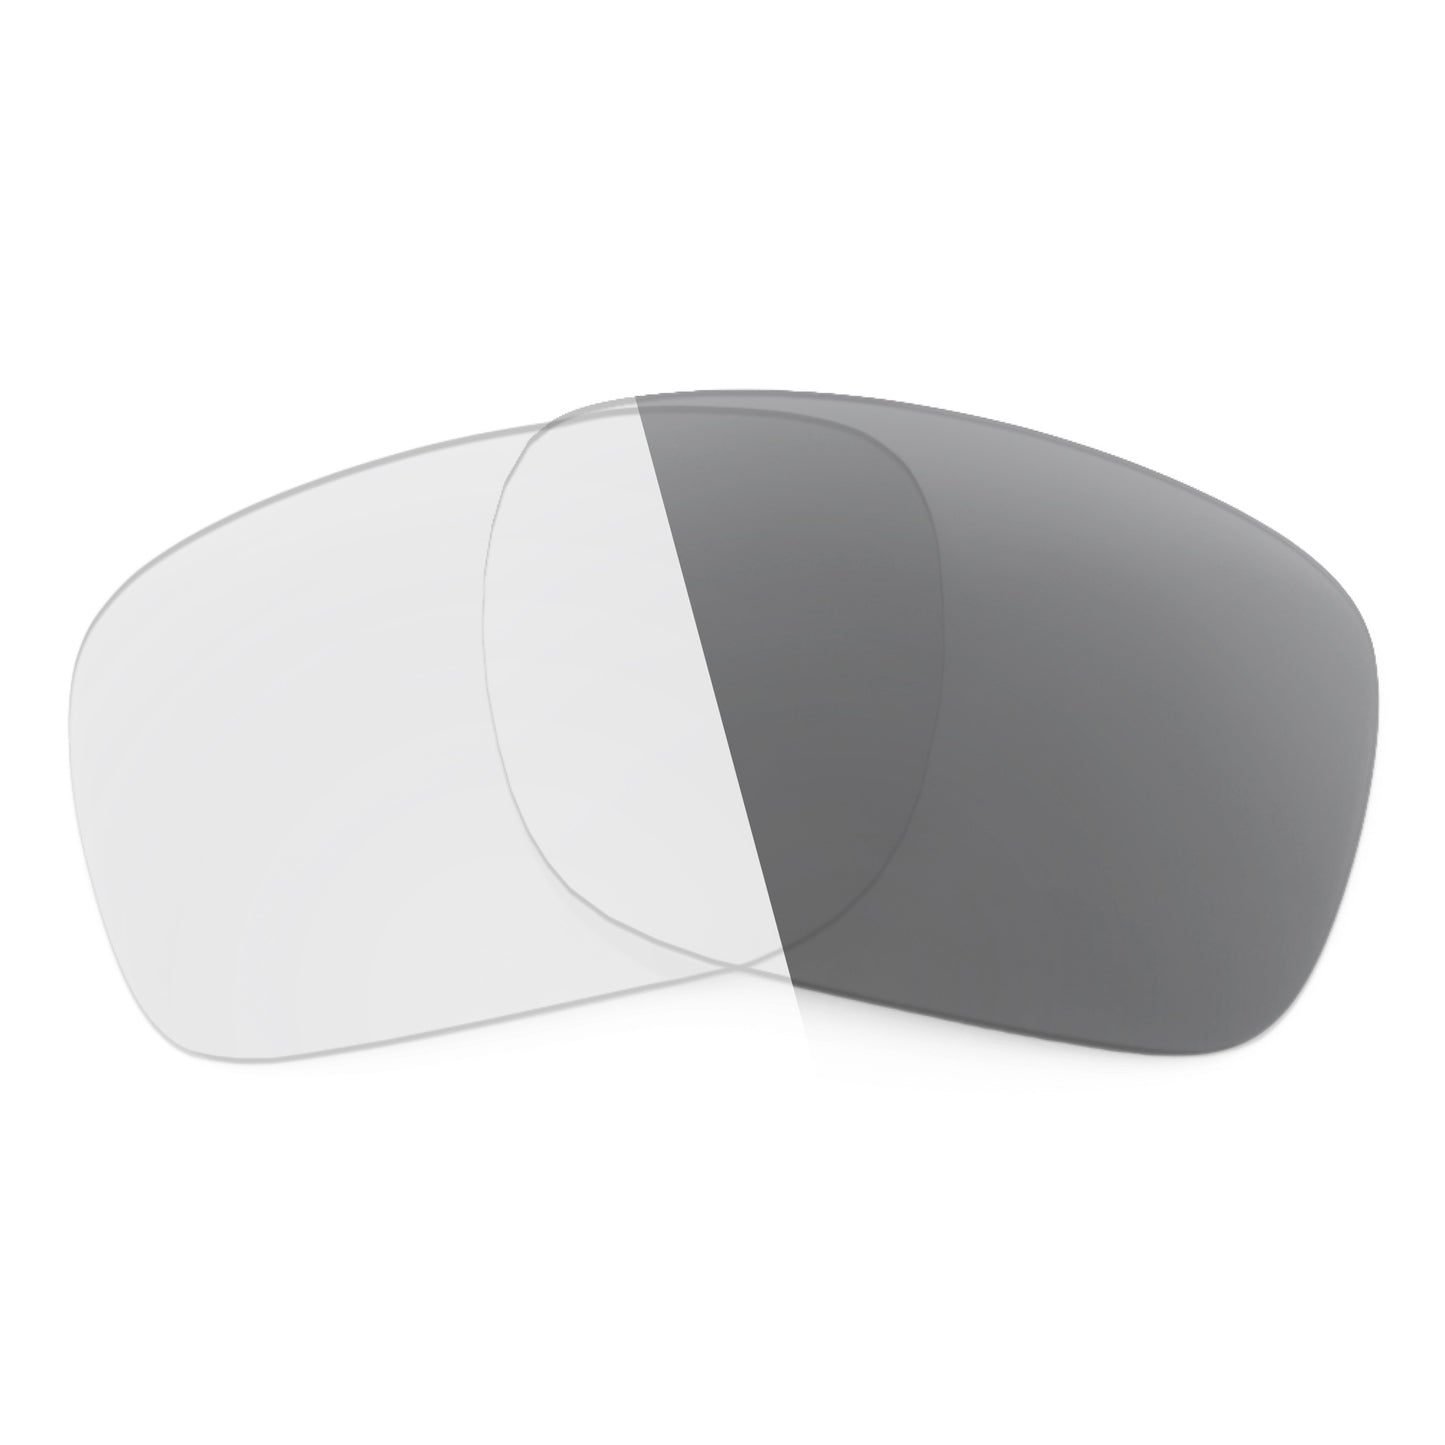 Revant replacement lenses for Oakley Latch Square (Low Bridge Fit) Non-Polarized Adapt Gray Photochromic